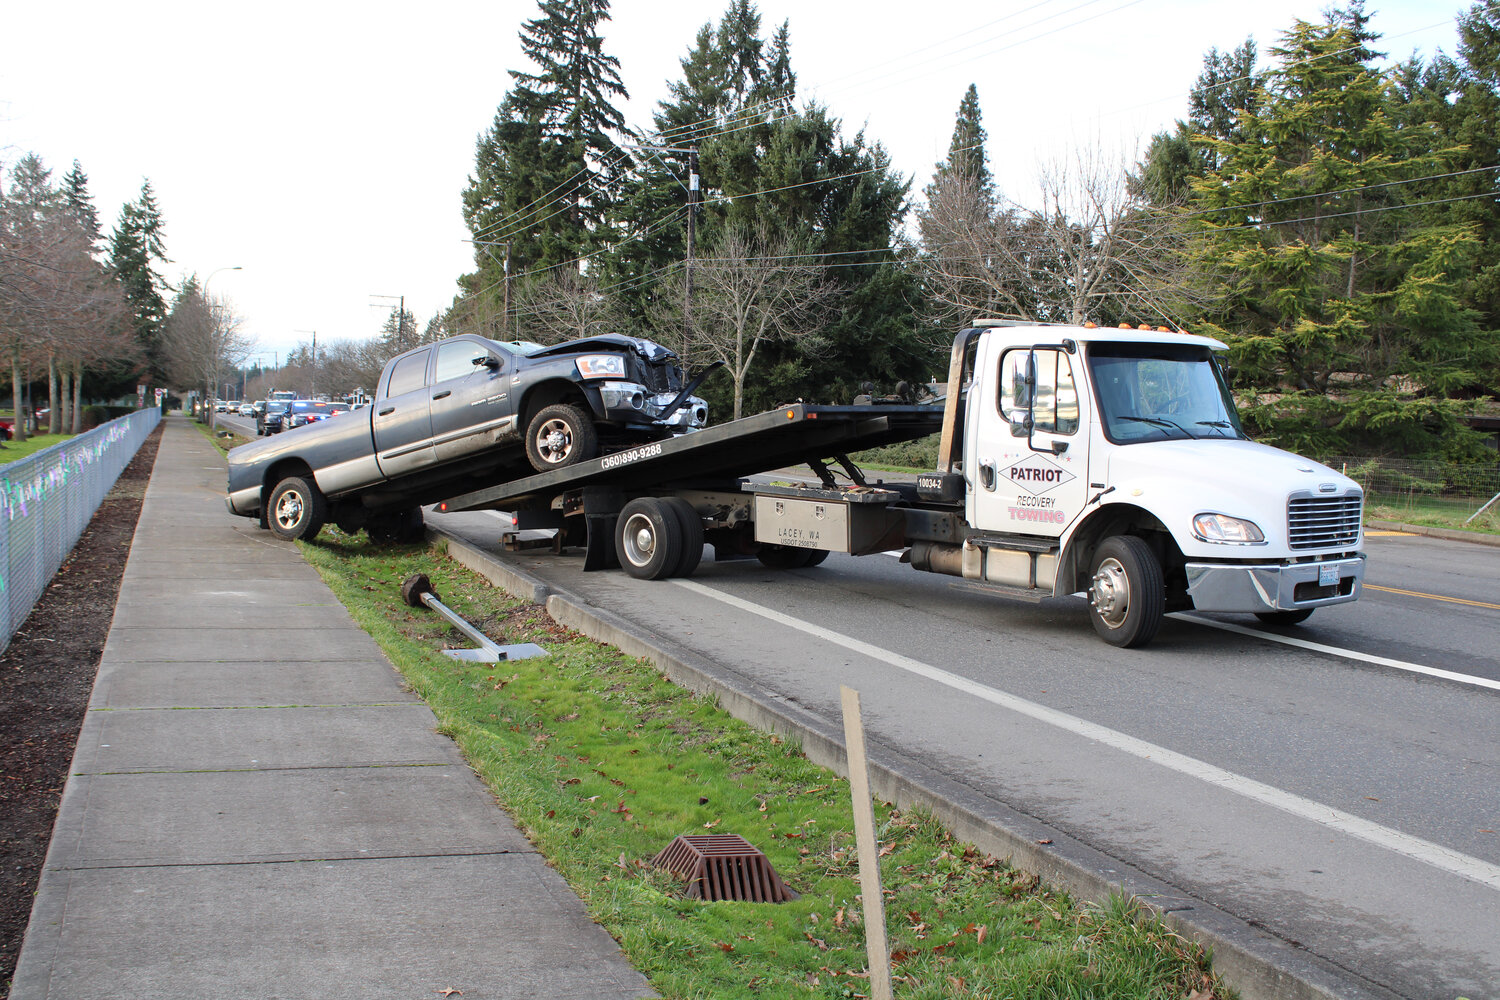 A tow truck from Patriot Recovery Towing lifts the damaged Dodge Ram from the sidewalk in front of Yelm High School on Jan. 30.